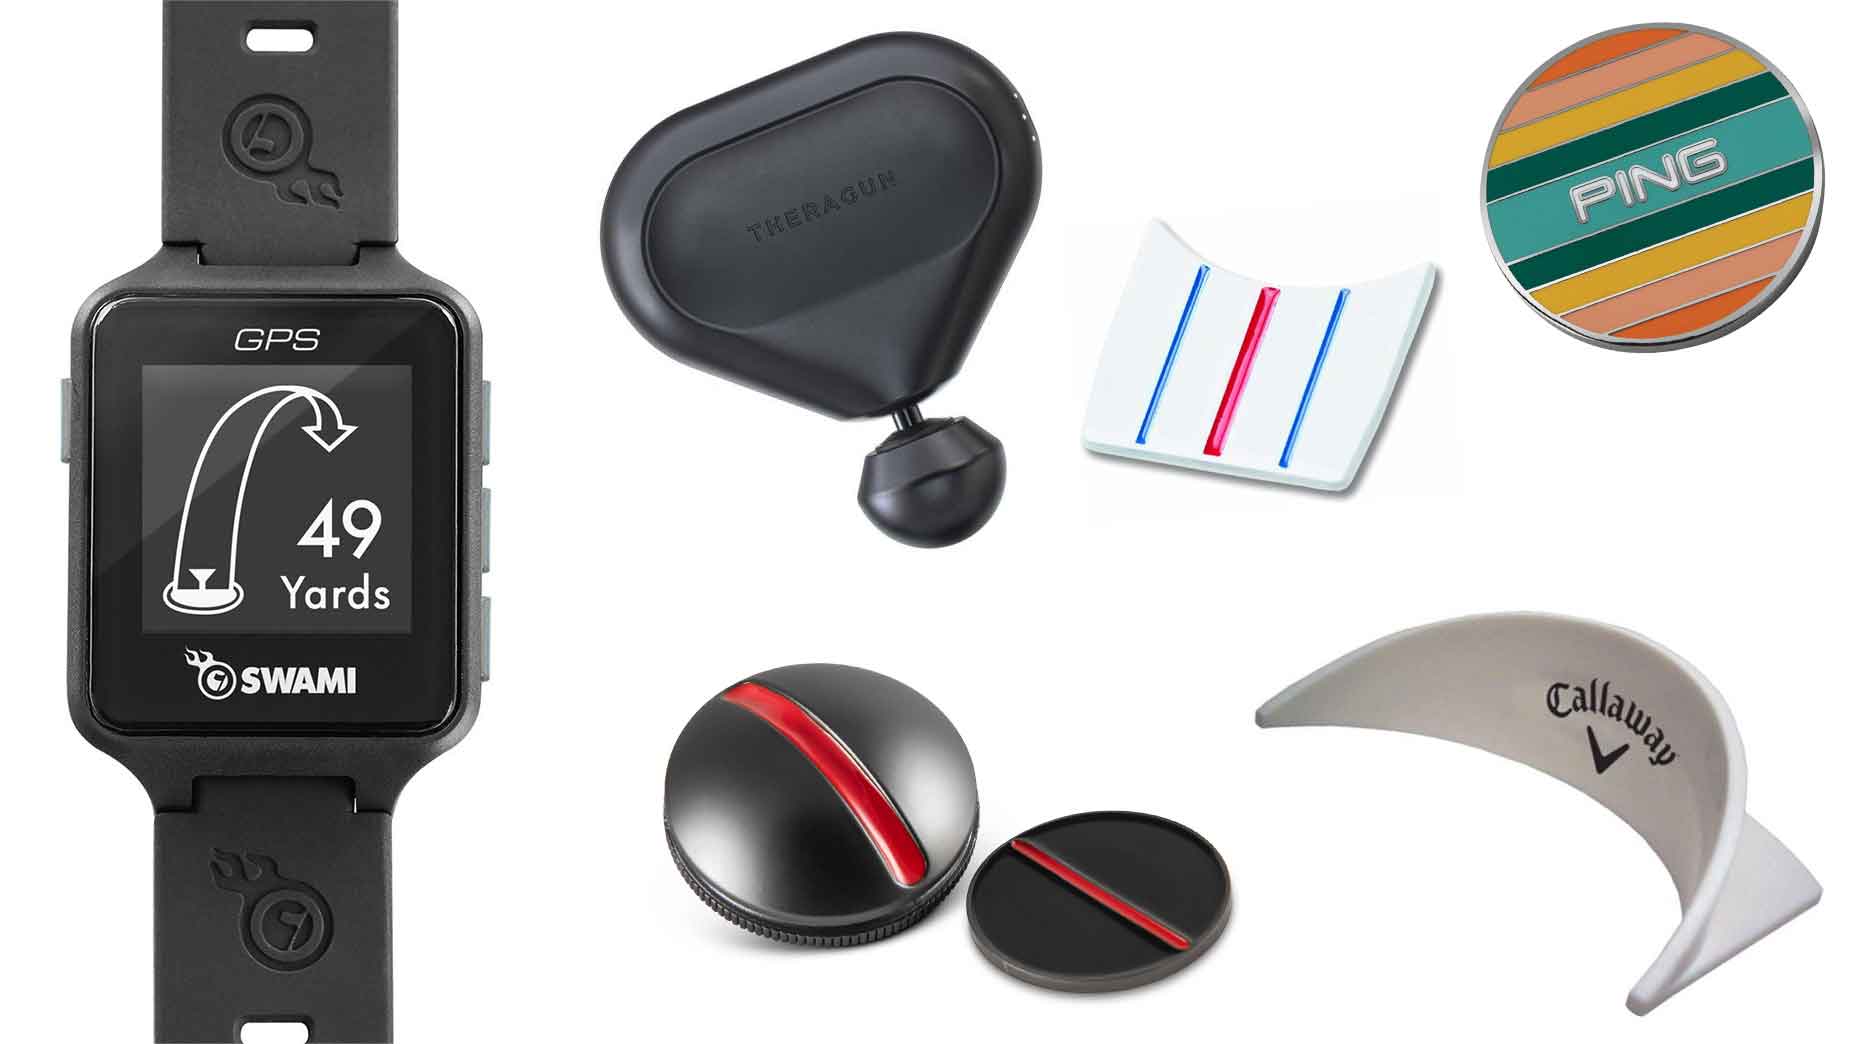 These 10 golf accessories make great gifts